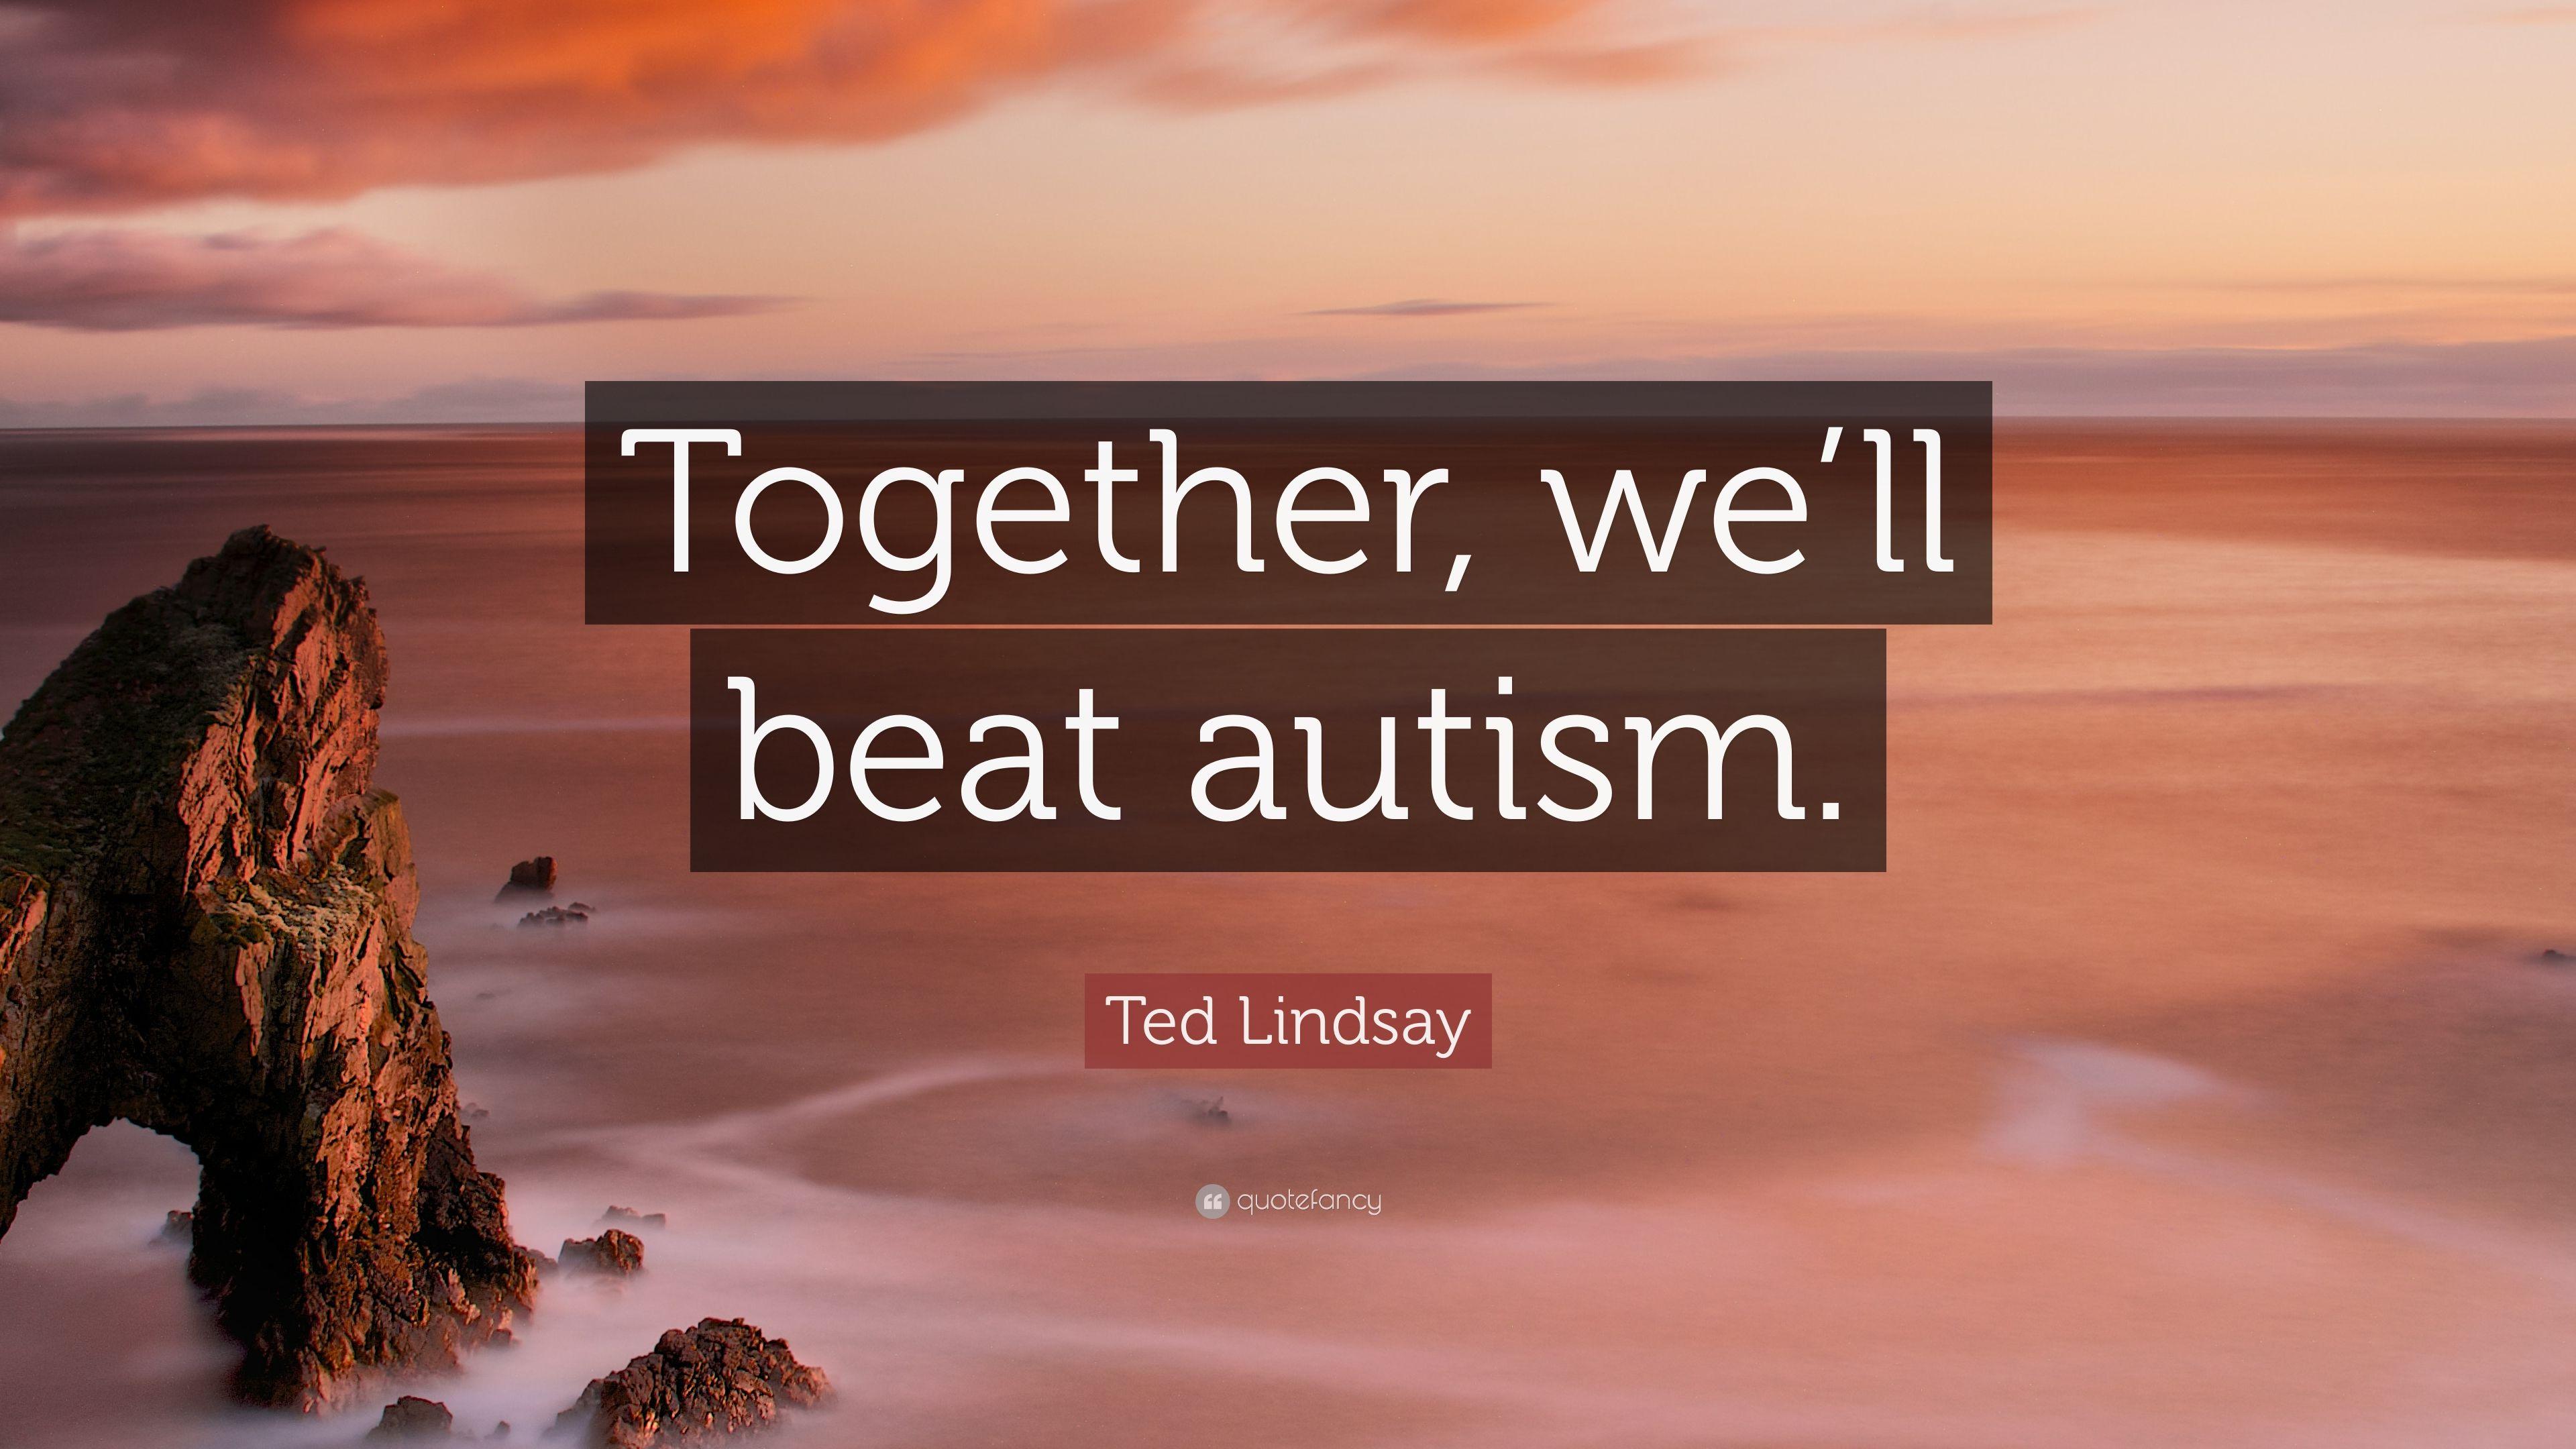 Ted Lindsay Quote: “Together, we'll beat autism.” 7 wallpaper